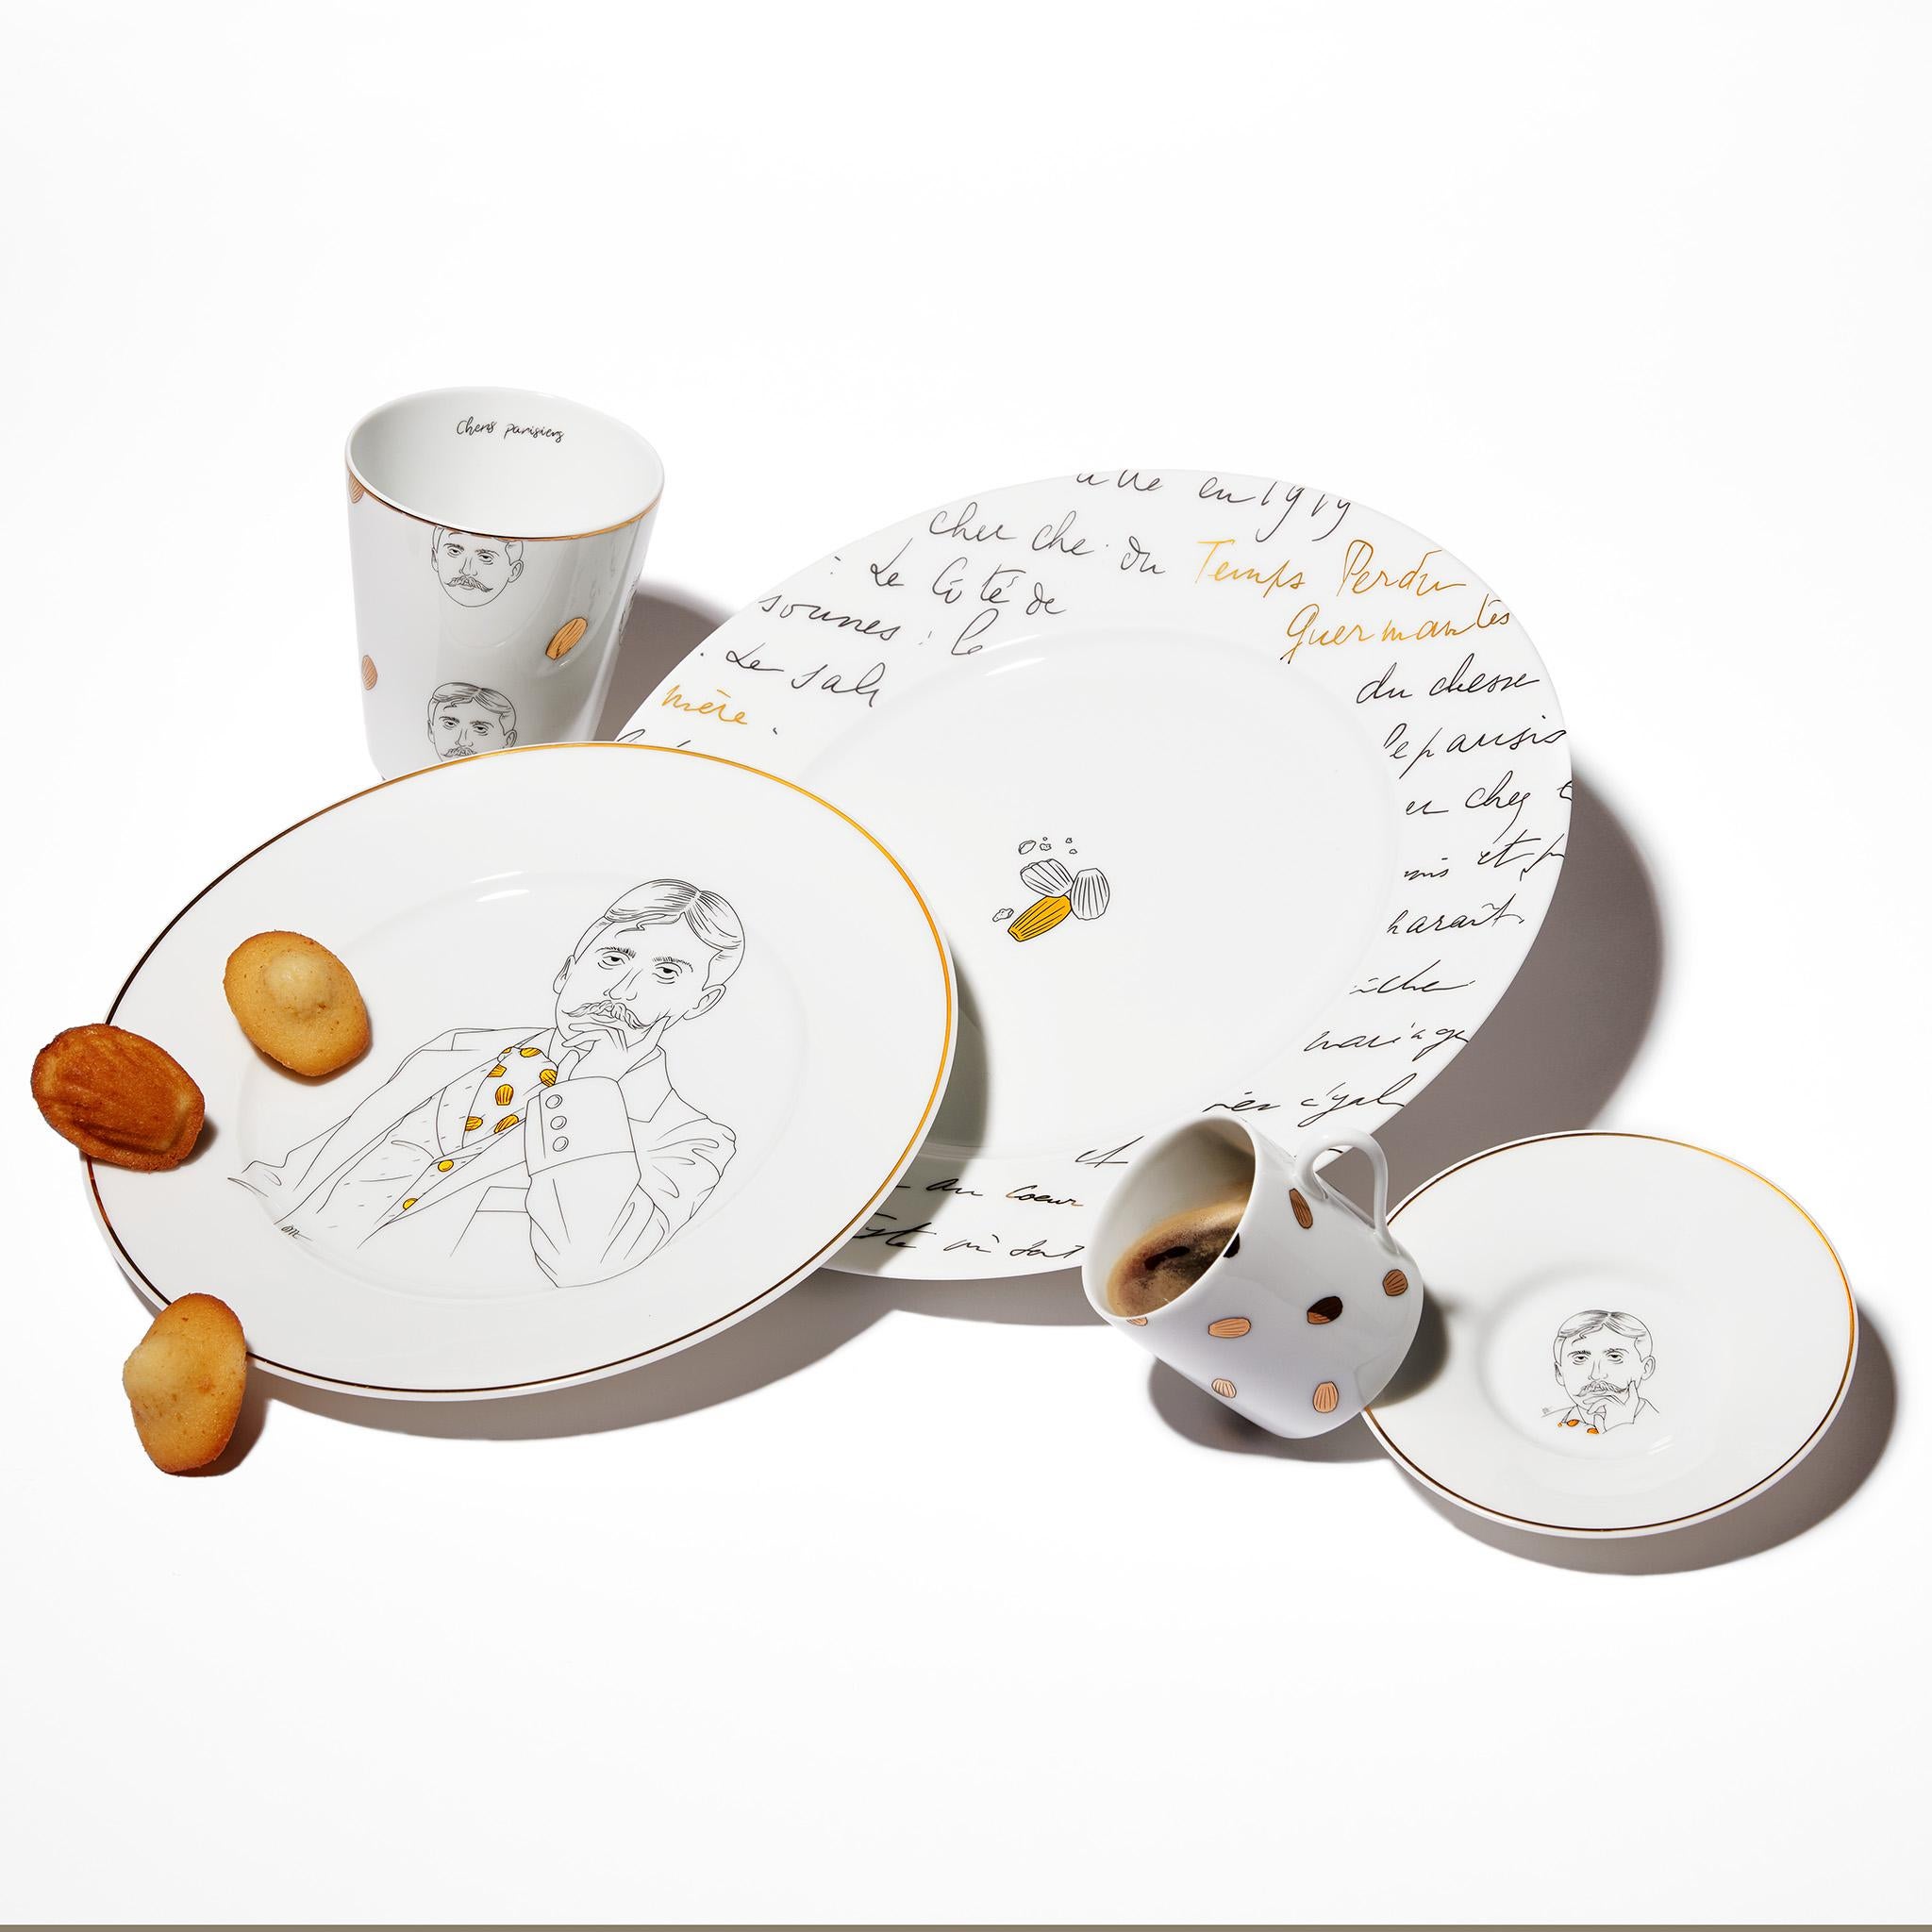 The collection is made of fine porcelain, in the purest tradition of Limoges. The fillets of the delicate designs are made of 24-carat gold and lovingly hand painted in accordance with the IGP Porcelaine de Limoges standards (Geographical Production